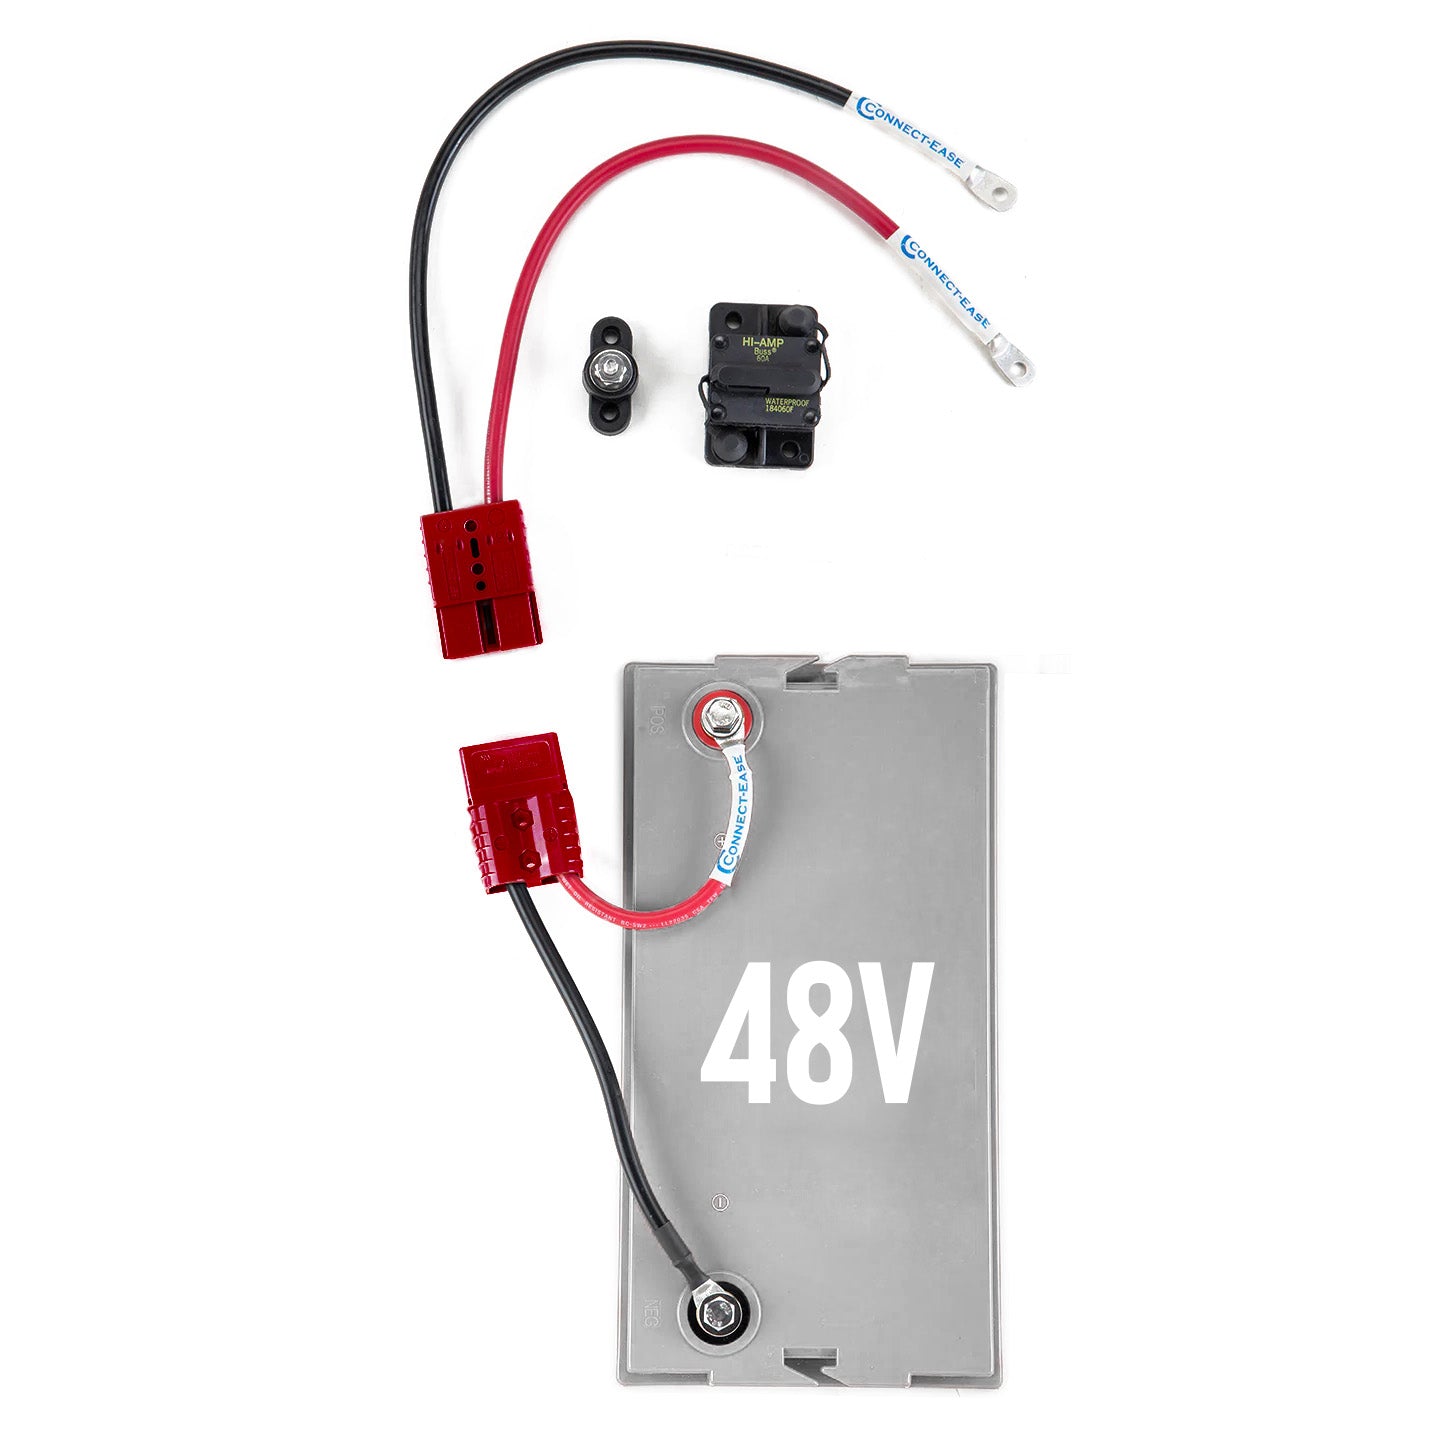 48V DRIVER Connection System for Single Case Lithium battery - Connect-Ease. Connect all your marine equipment with ease.